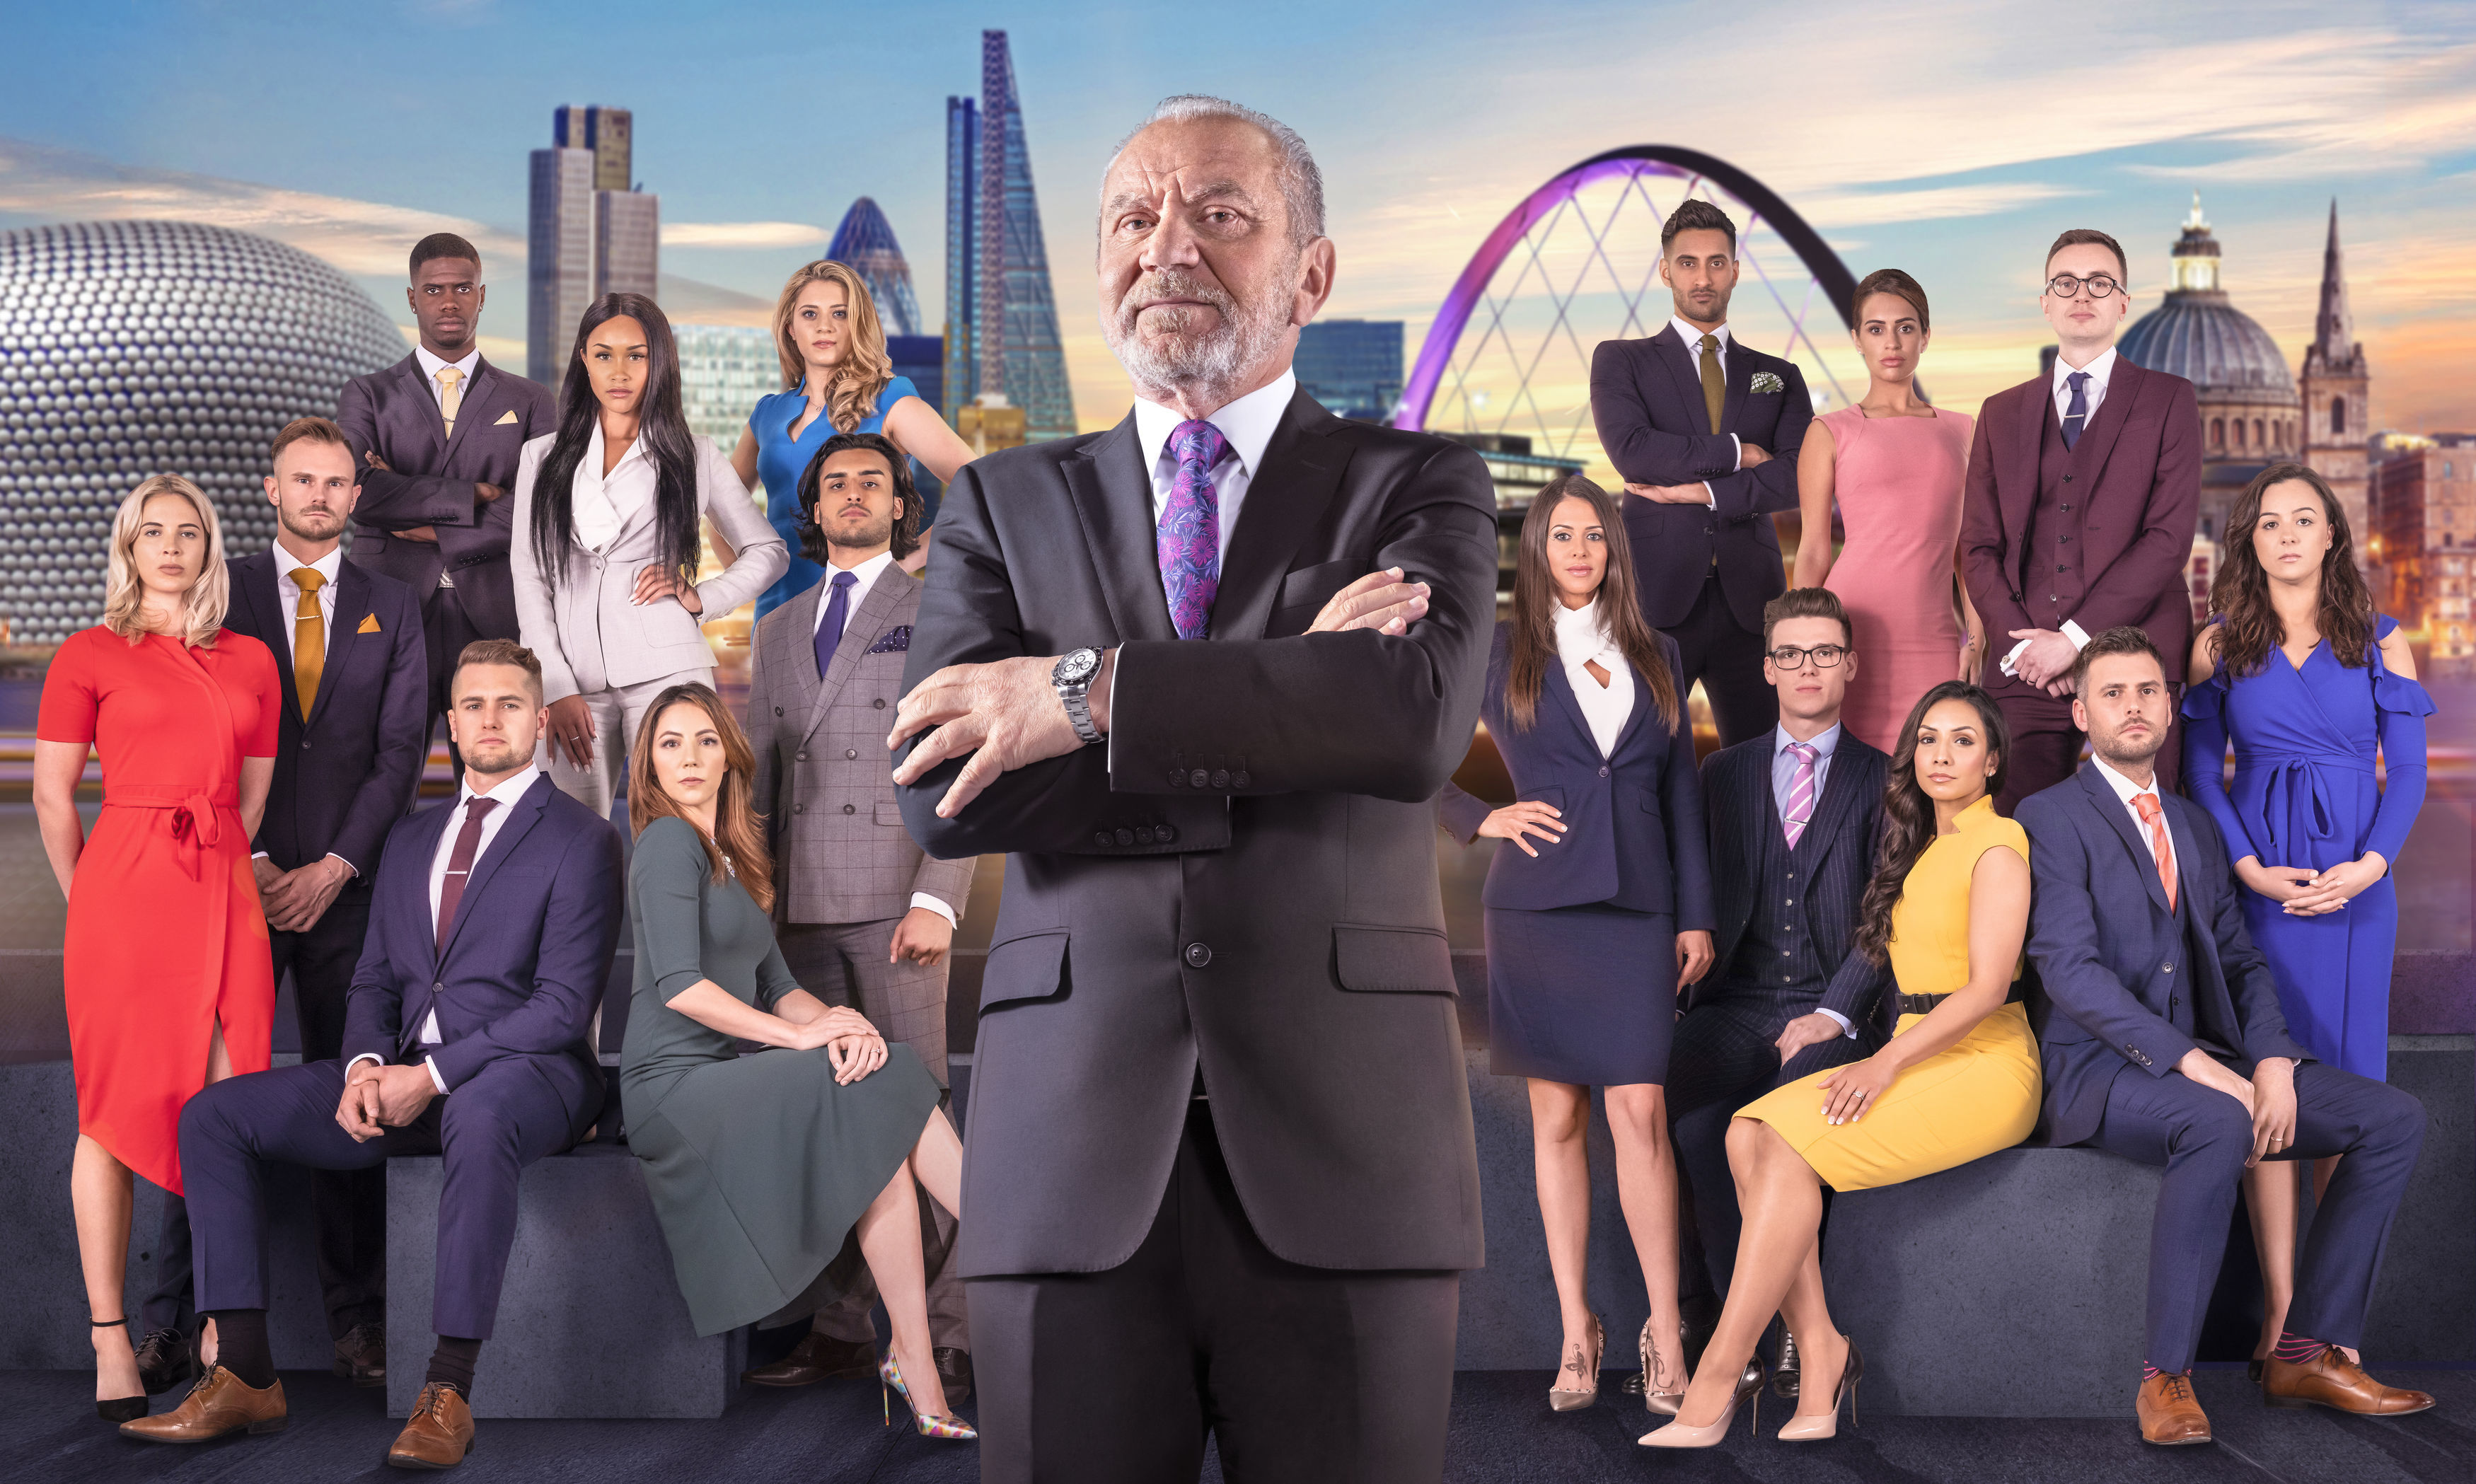 Lord Sugar and this year's candidates (BBC / PA Wire)